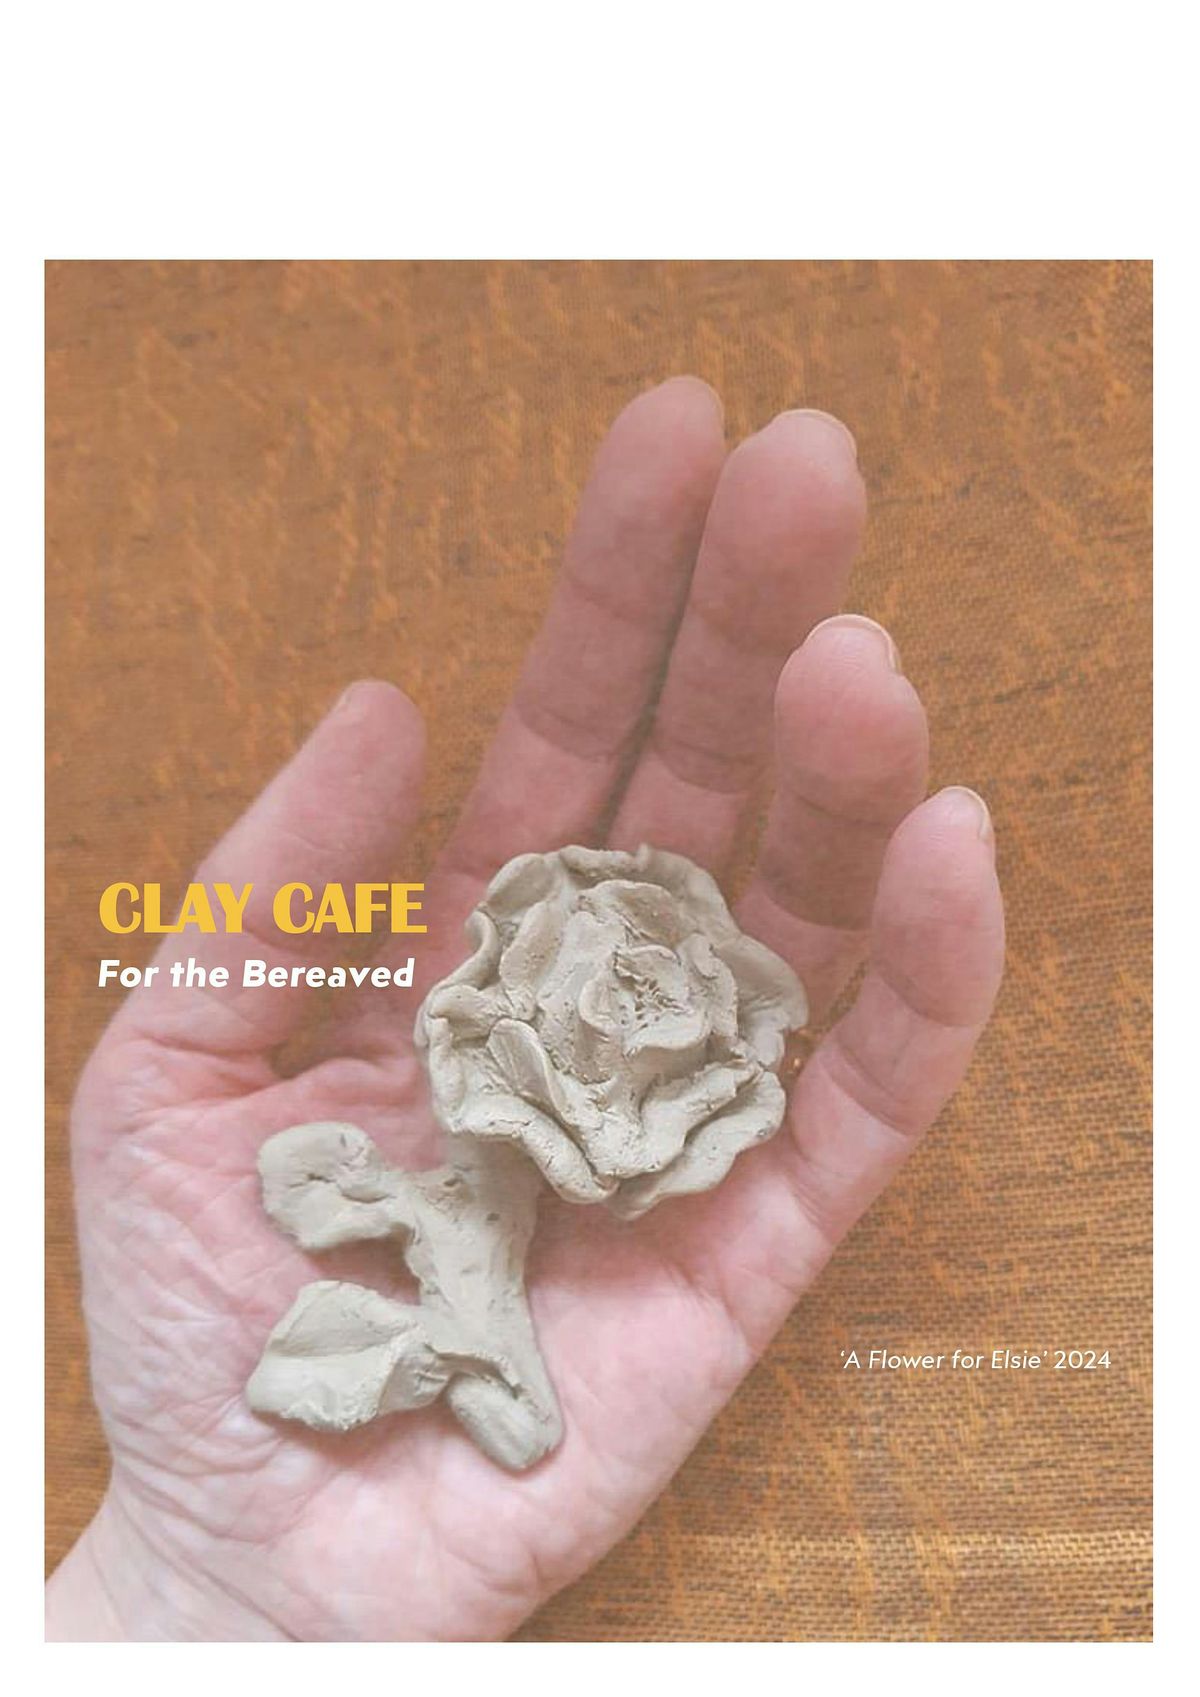 Clay Cafe for the Bereaved